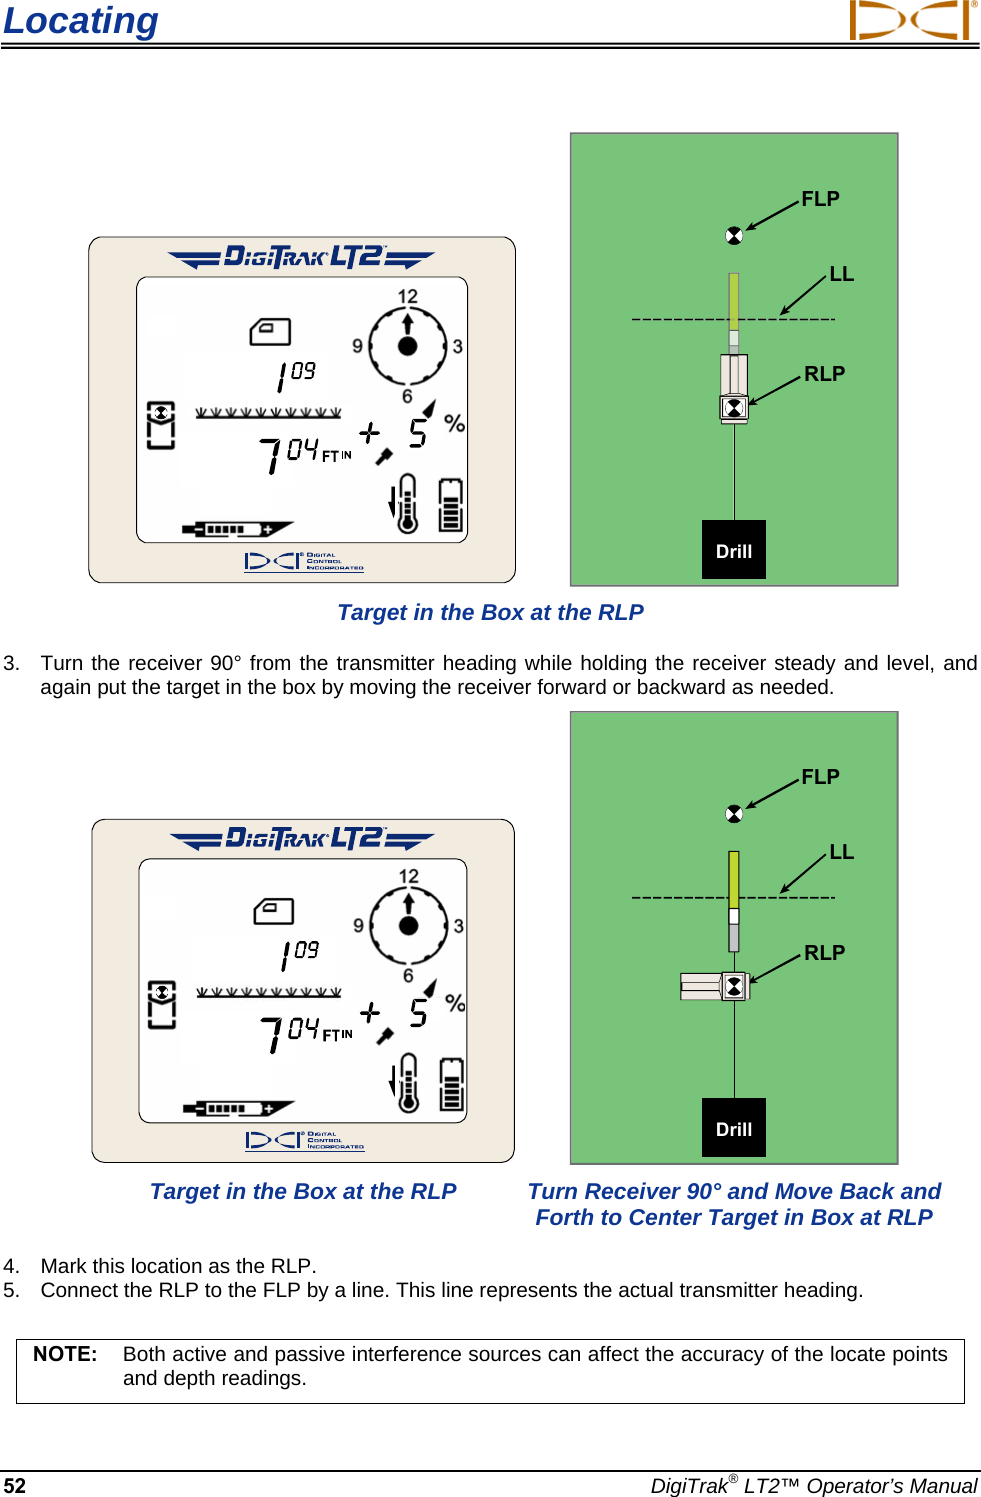 Locating     DrillLLFLPRLP Target in the Box at the RLP 3.  Turn the receiver 90° from the transmitter heading while holding the receiver steady and level, and again put the target in the box by moving the receiver forward or backward as needed.     DrillLLFLPRLP   Target in the Box at the RLP  Turn Receiver 90° and Move Back and      Forth to Center Target in Box at RLP  4.  Mark this location as the RLP.  5.  Connect the RLP to the FLP by a line. This line represents the actual transmitter heading.   NOTE:  Both active and passive interference sources can affect the accuracy of the locate points and depth readings. 52  DigiTrak® LT2™ Operator’s Manual 